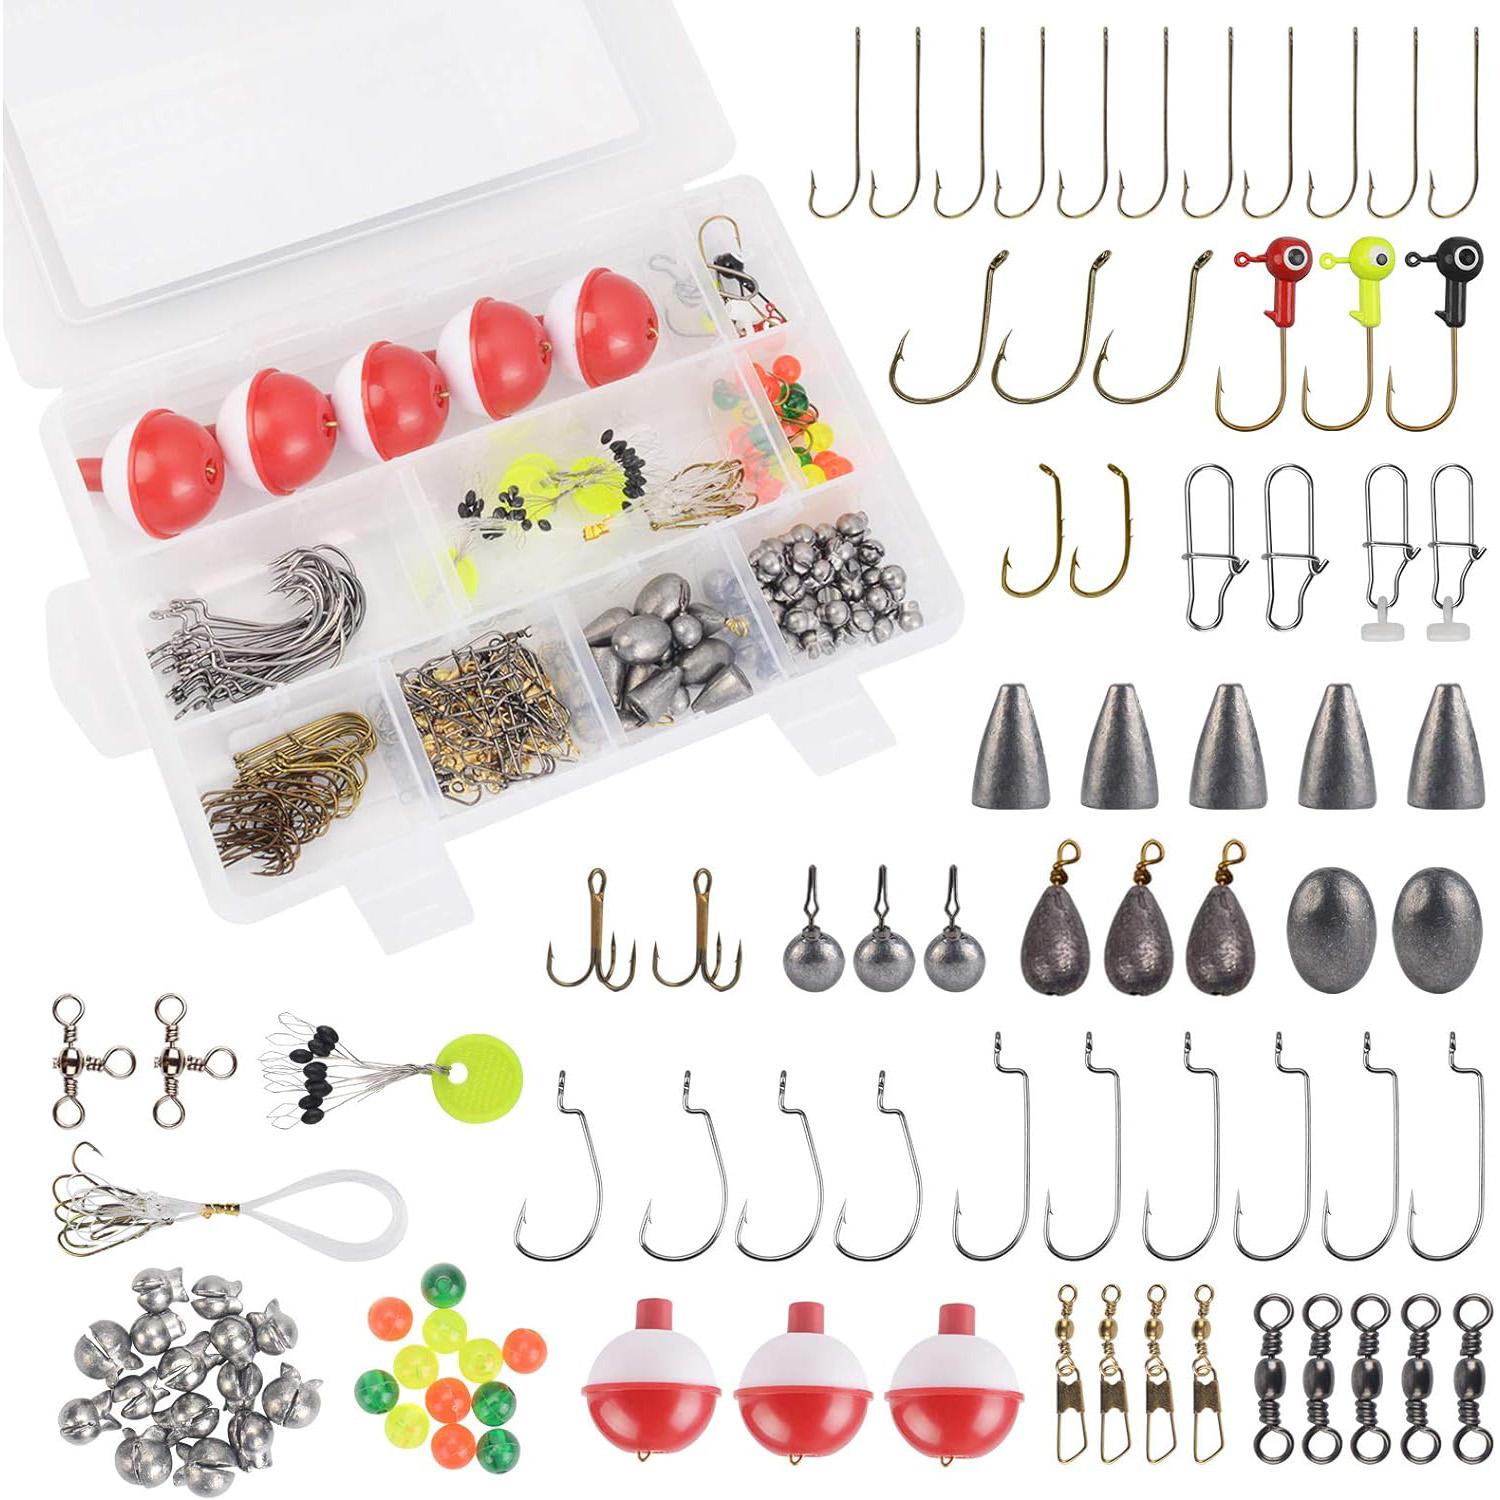 Freshwater Fishing Kit wit Clear Plastic Tackle Box for $12.99